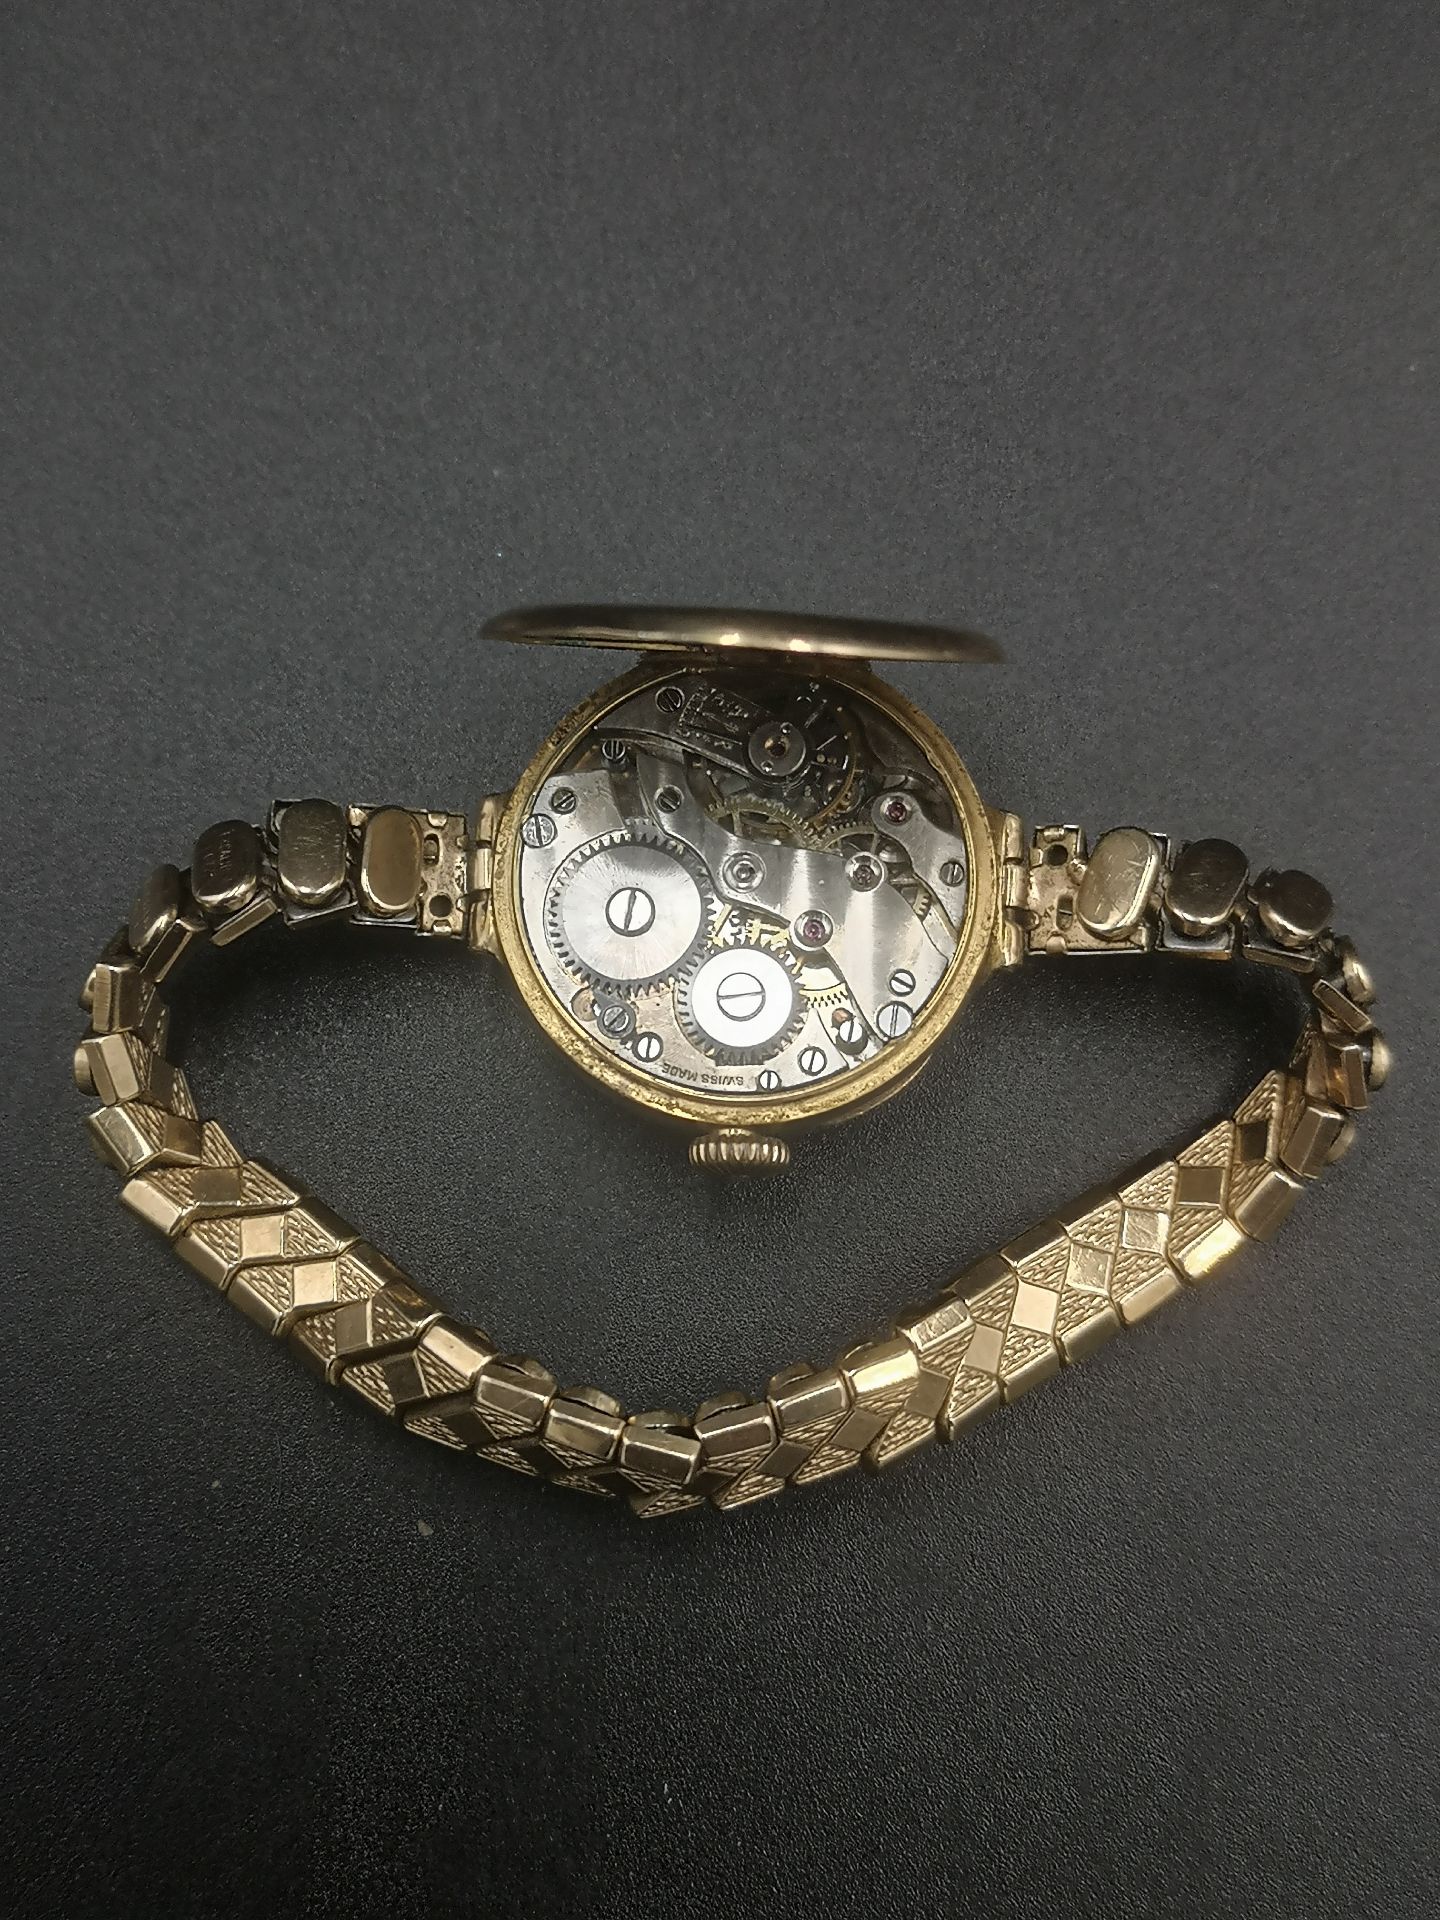 Ladies wrist watch with enamel face - Image 4 of 5